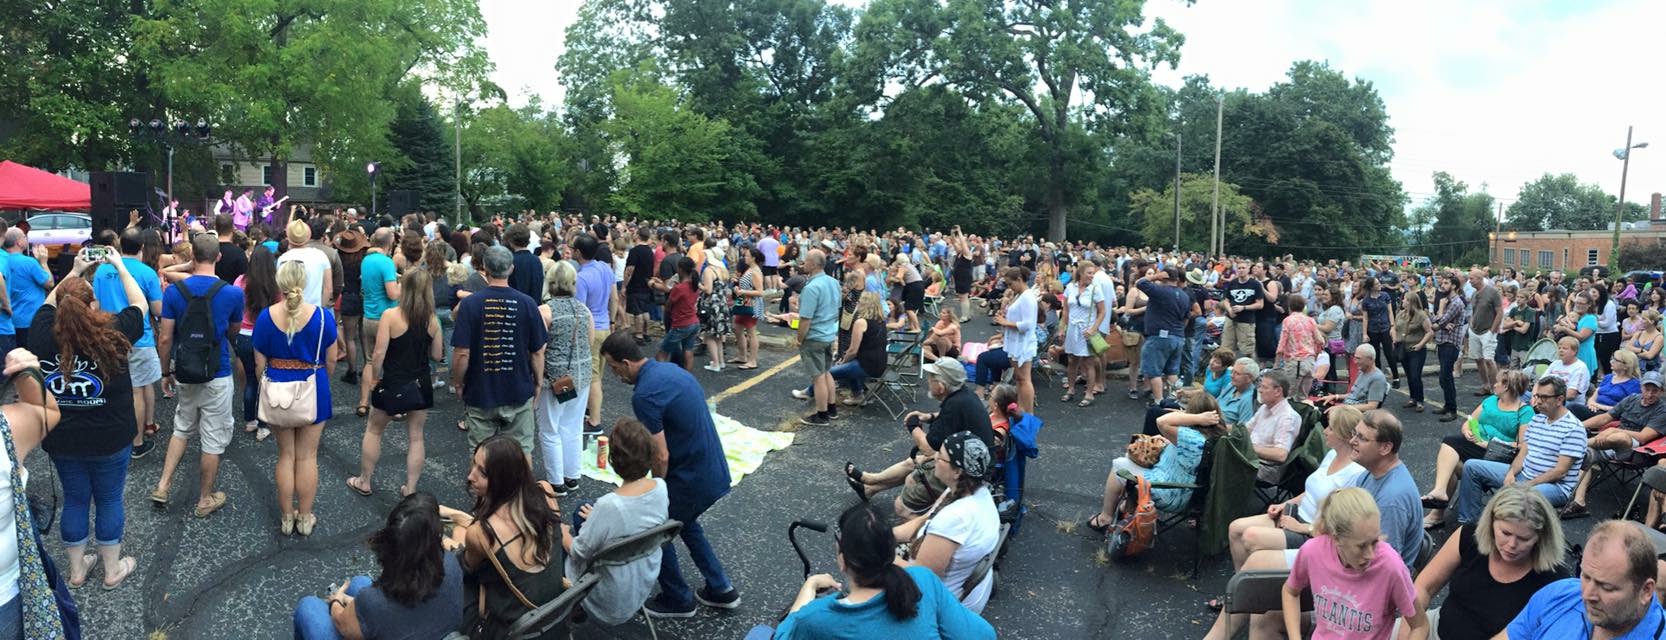 Porch Rokr Neighborhood music festival in Akron, Ohio, attracts almost